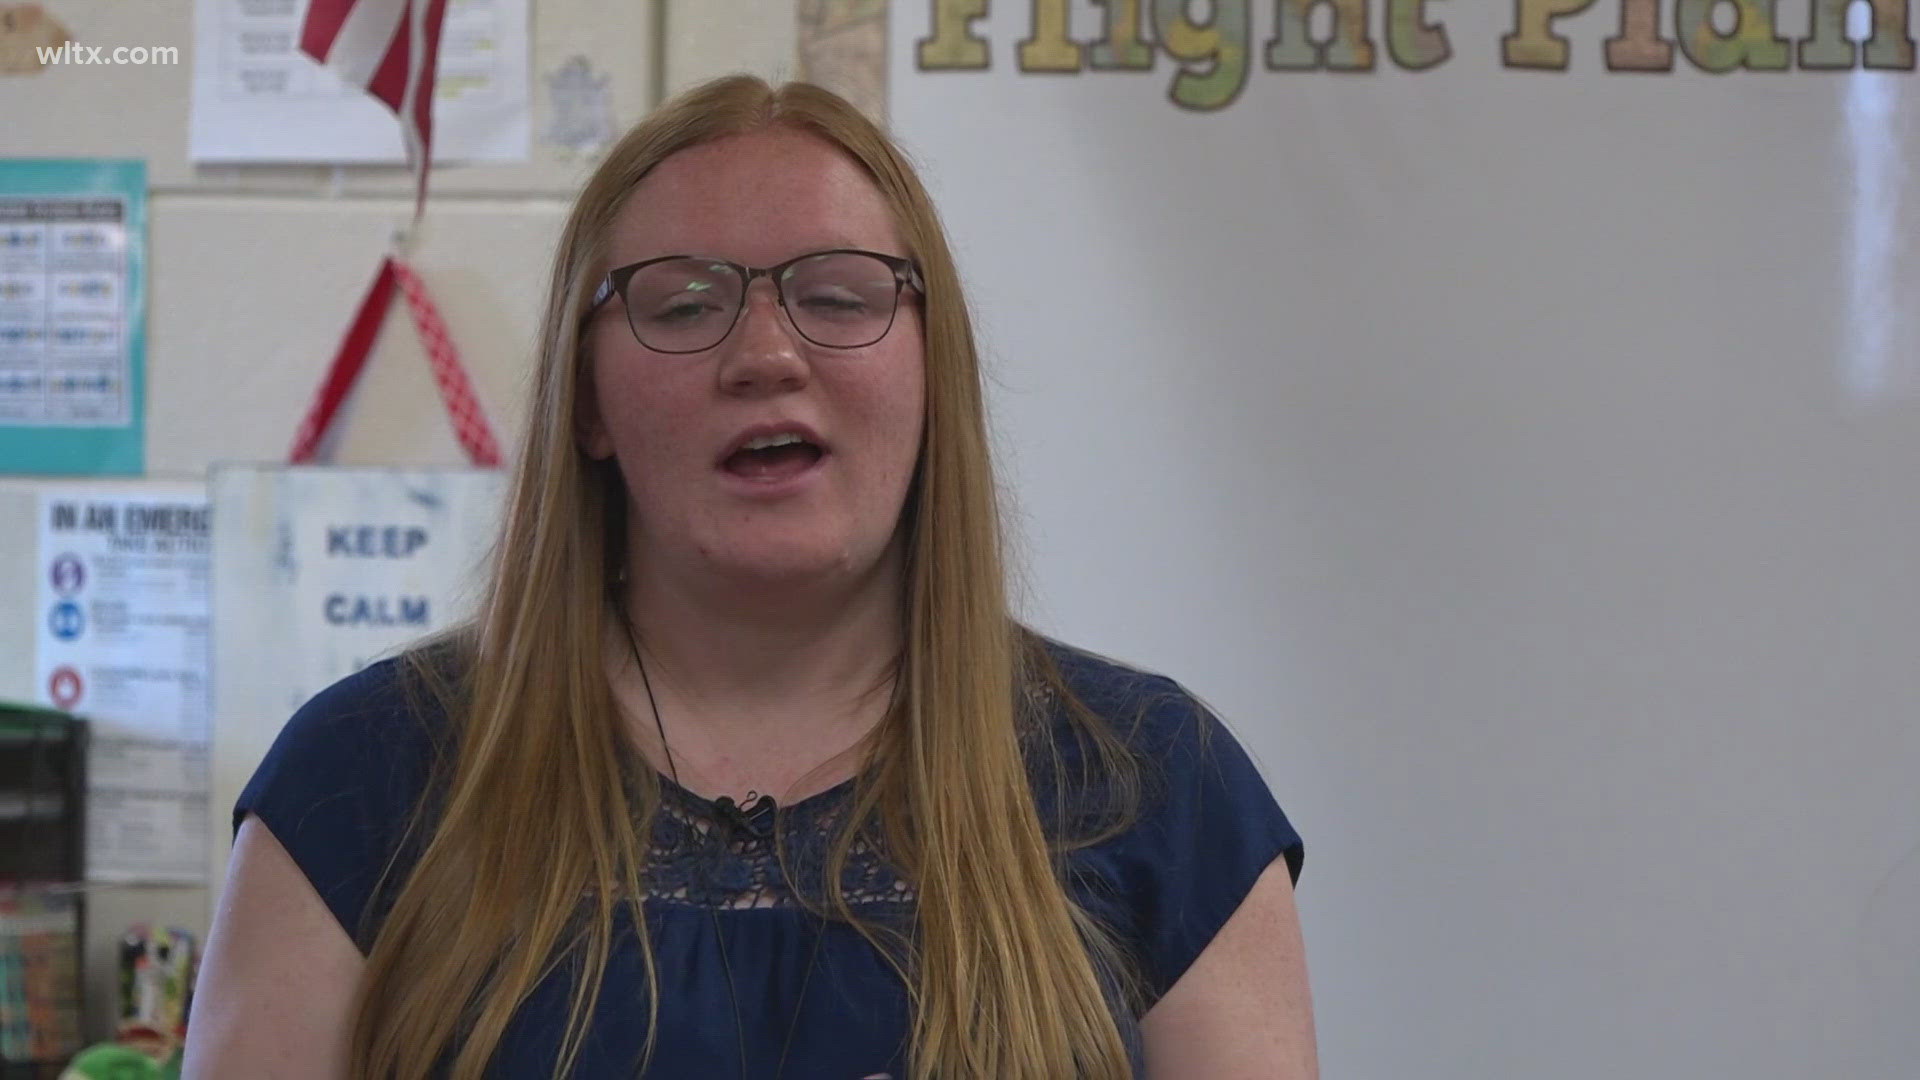 The WLTX Teacher of the Week is Ashlee Morse from Hollywood Elementary school in Saluda.